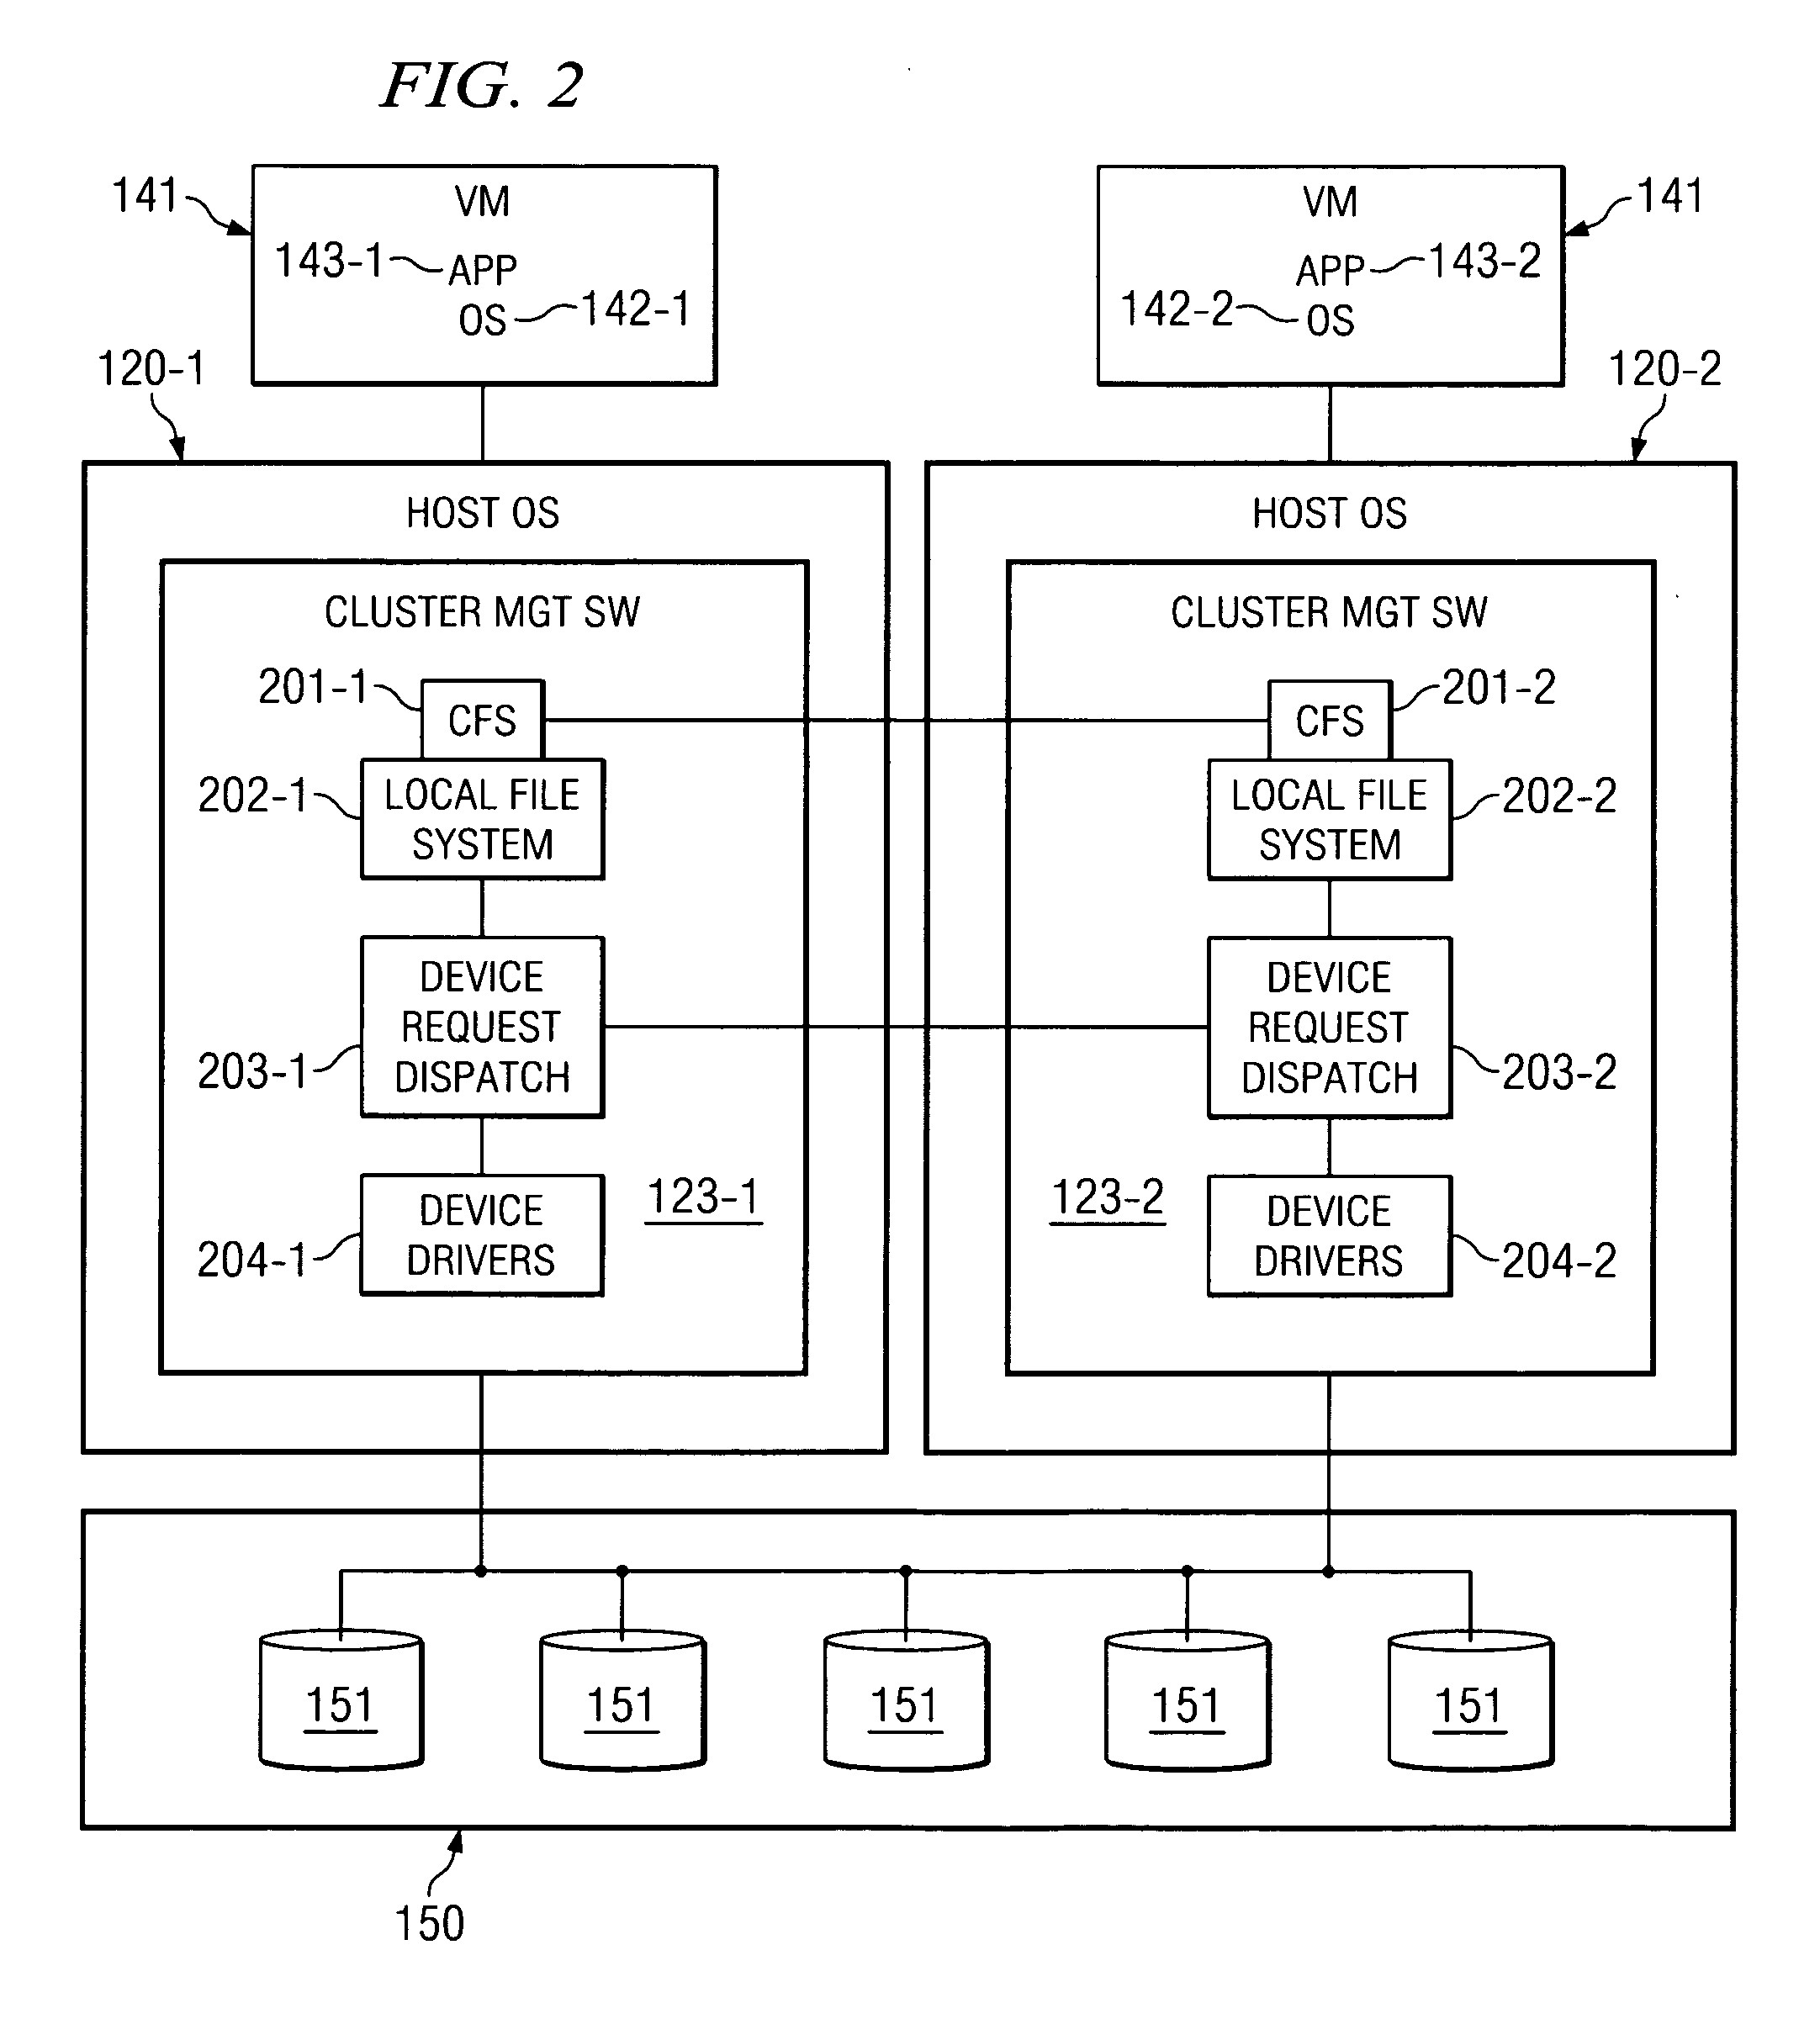 System and method for migrating virtual machines on cluster systems